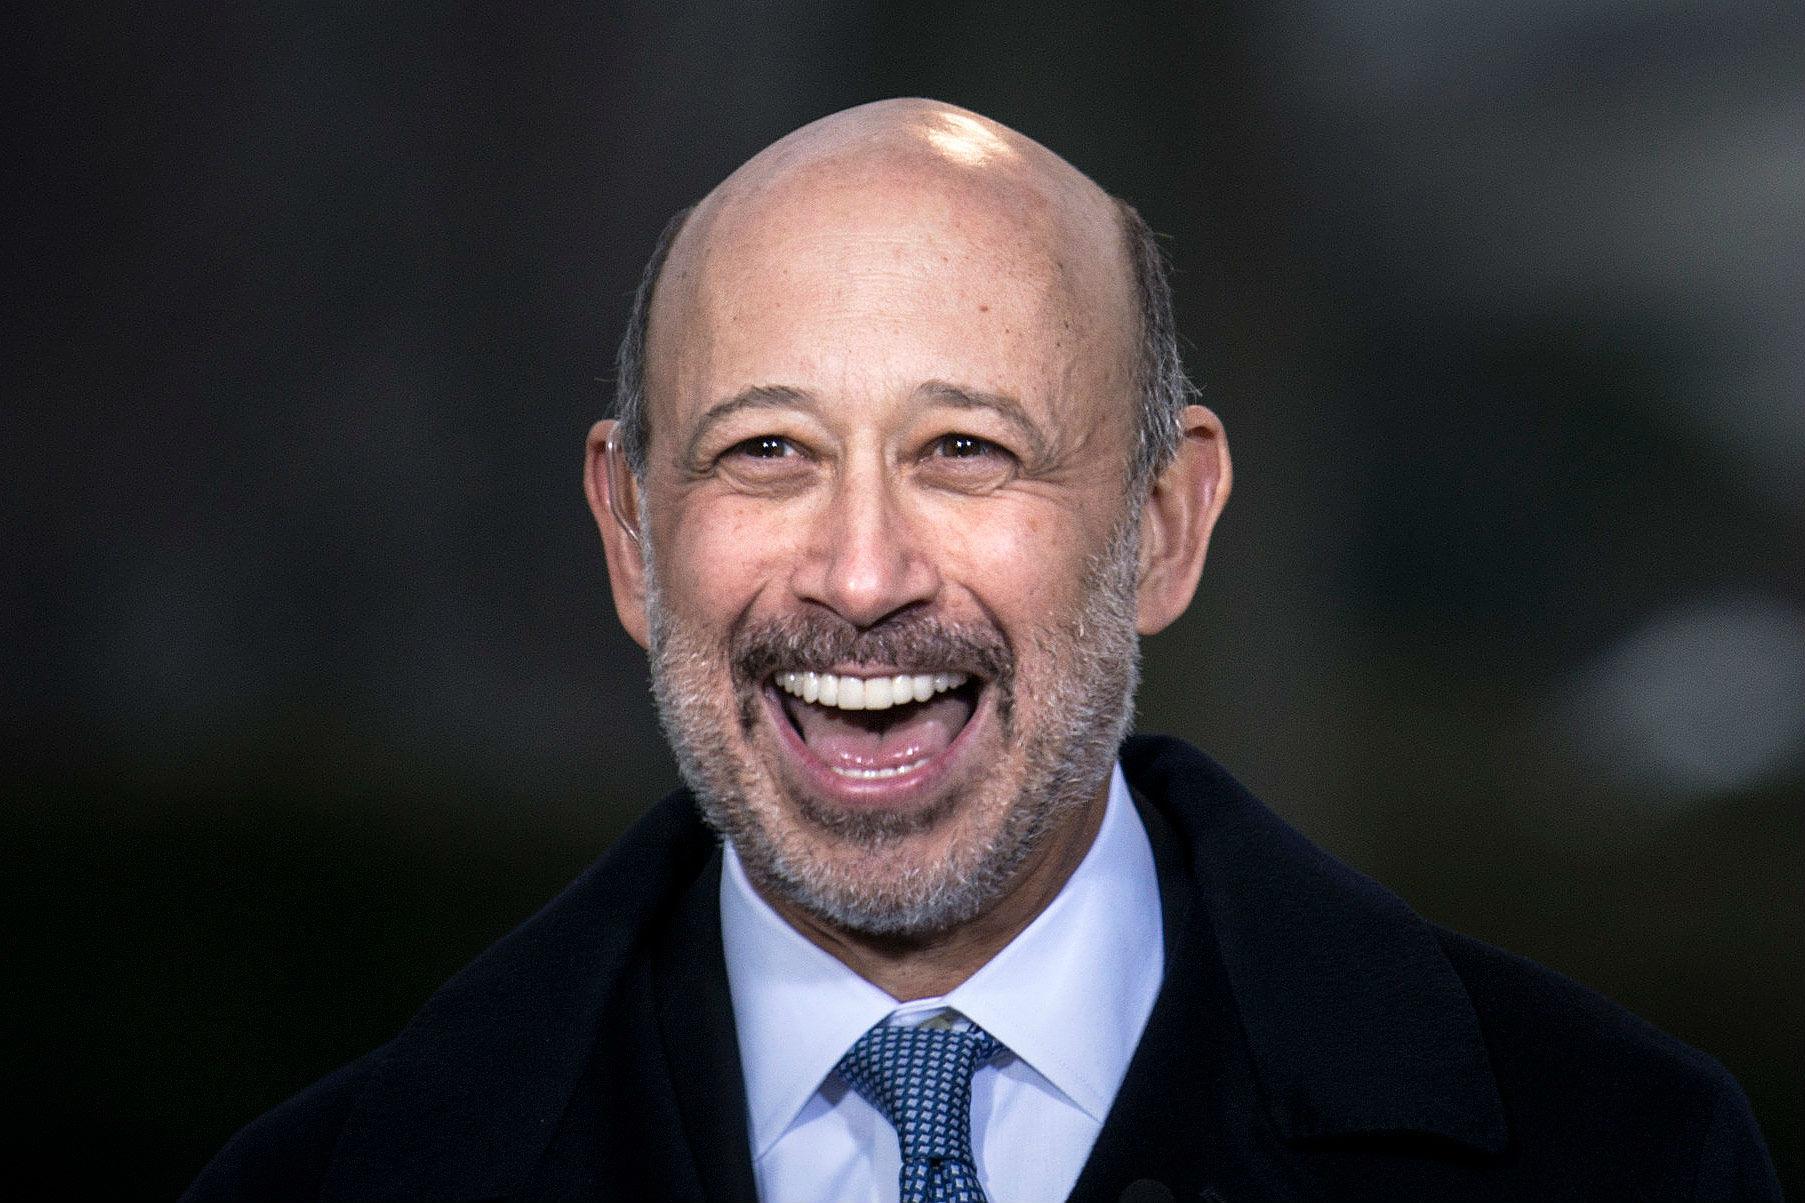 It’s not the first time Lloyd Blankfein has taken to Twiter